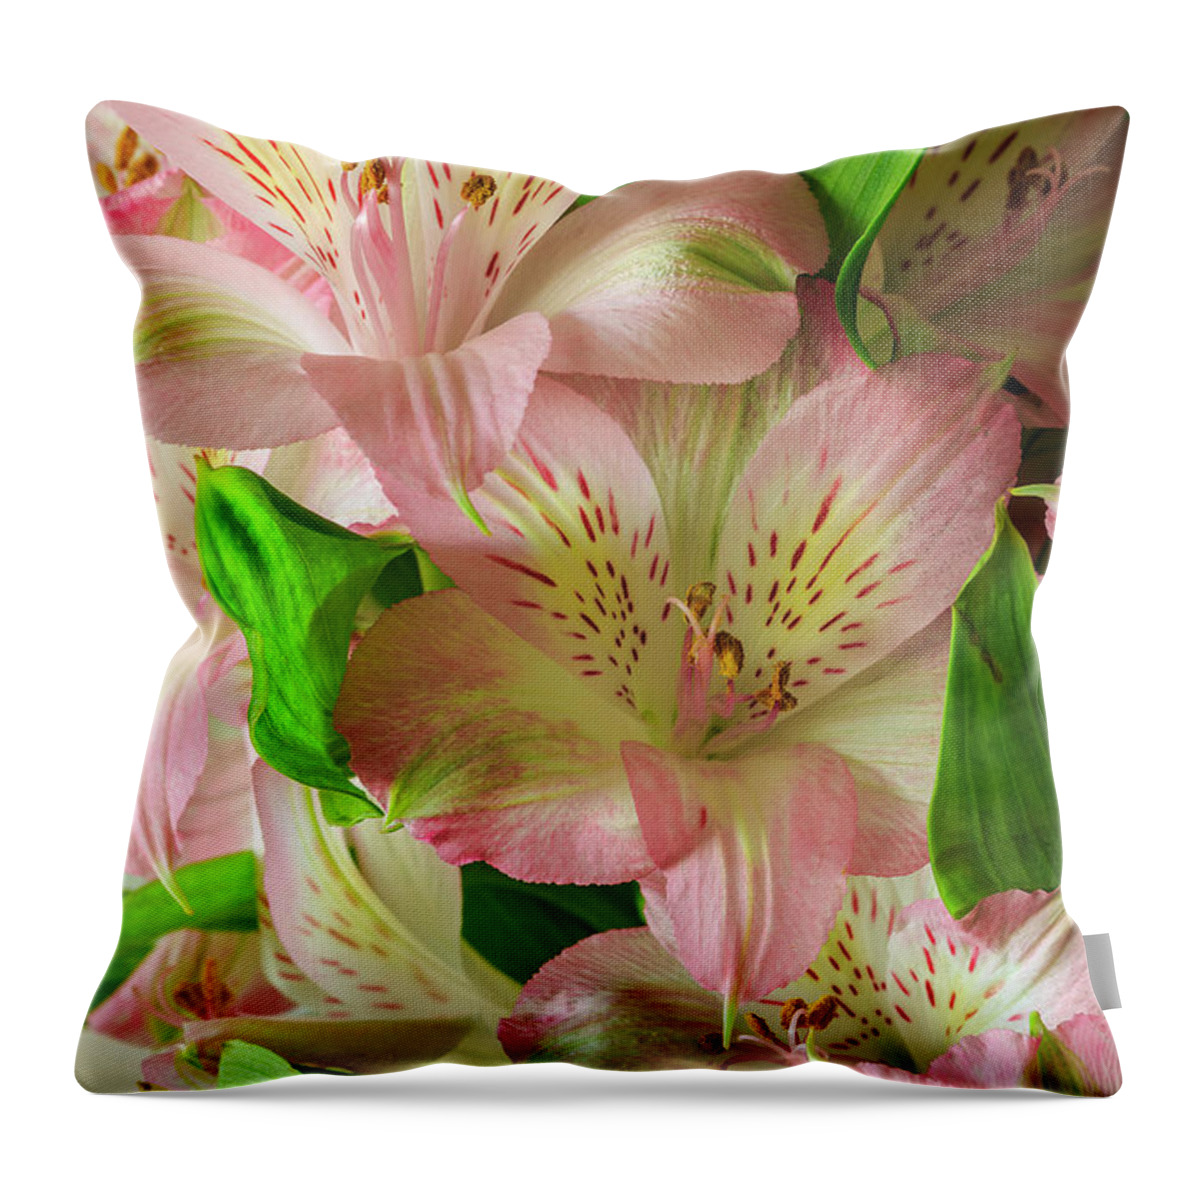 Peruvian Lilies Throw Pillow featuring the photograph Peruvian Lilies In Bloom by Richard J Thompson